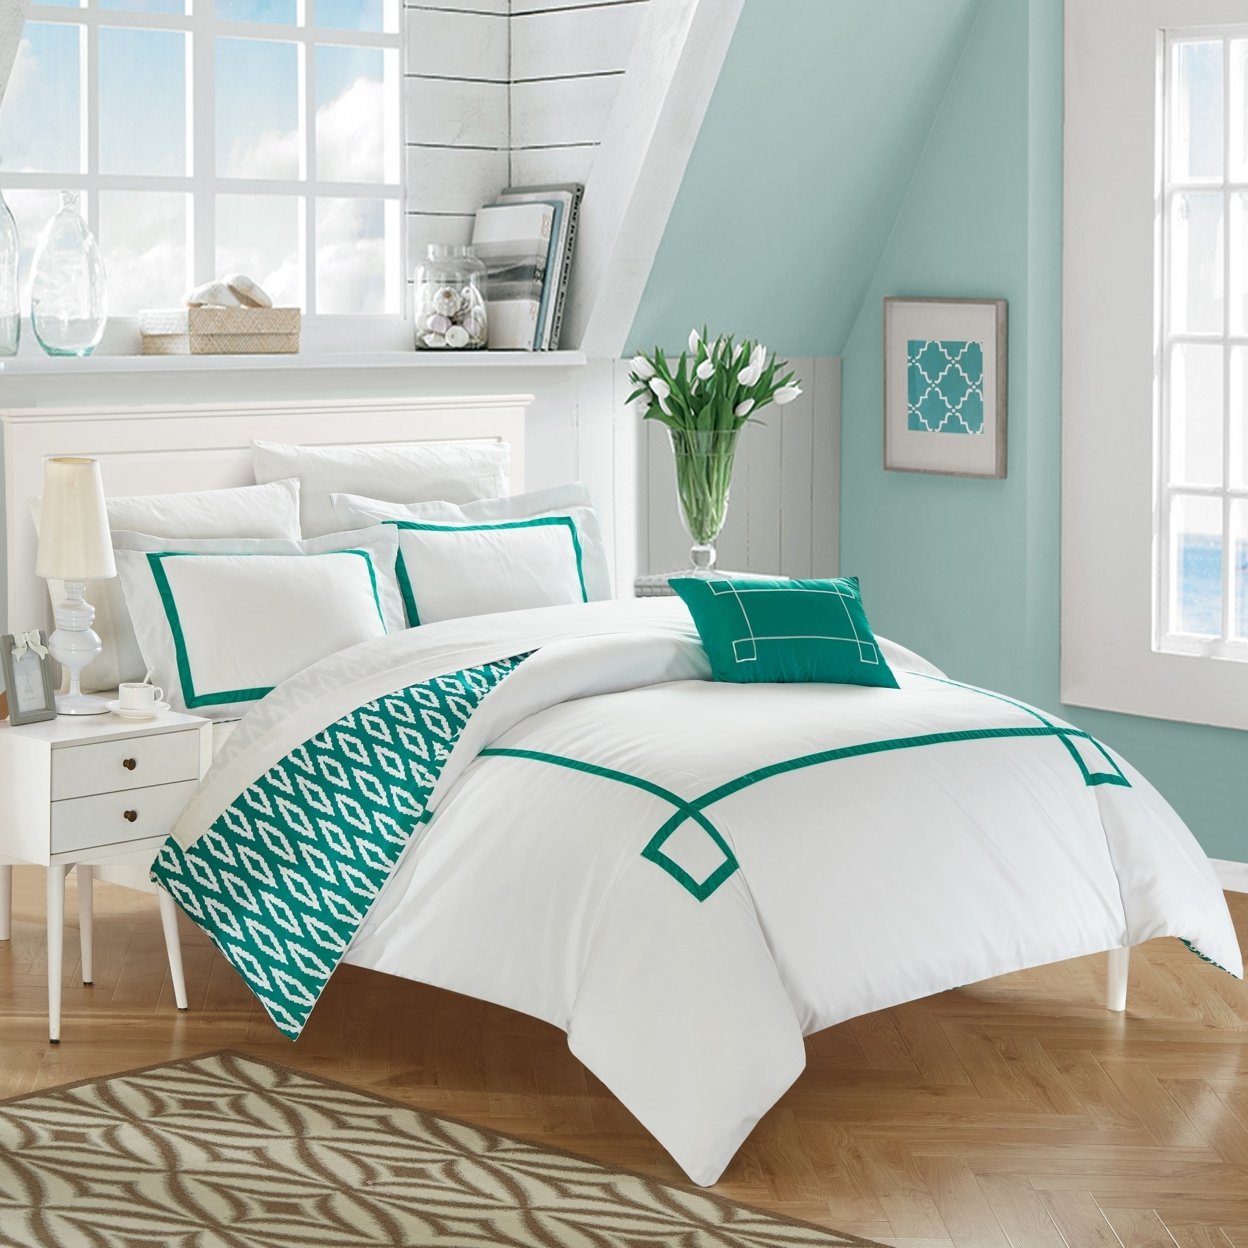 3/4 Piece Berwin Embroidered REVERSIBLE Duvet Cover Set With Shams And Decorative Pillows Included - Aqua, Twin X-Long